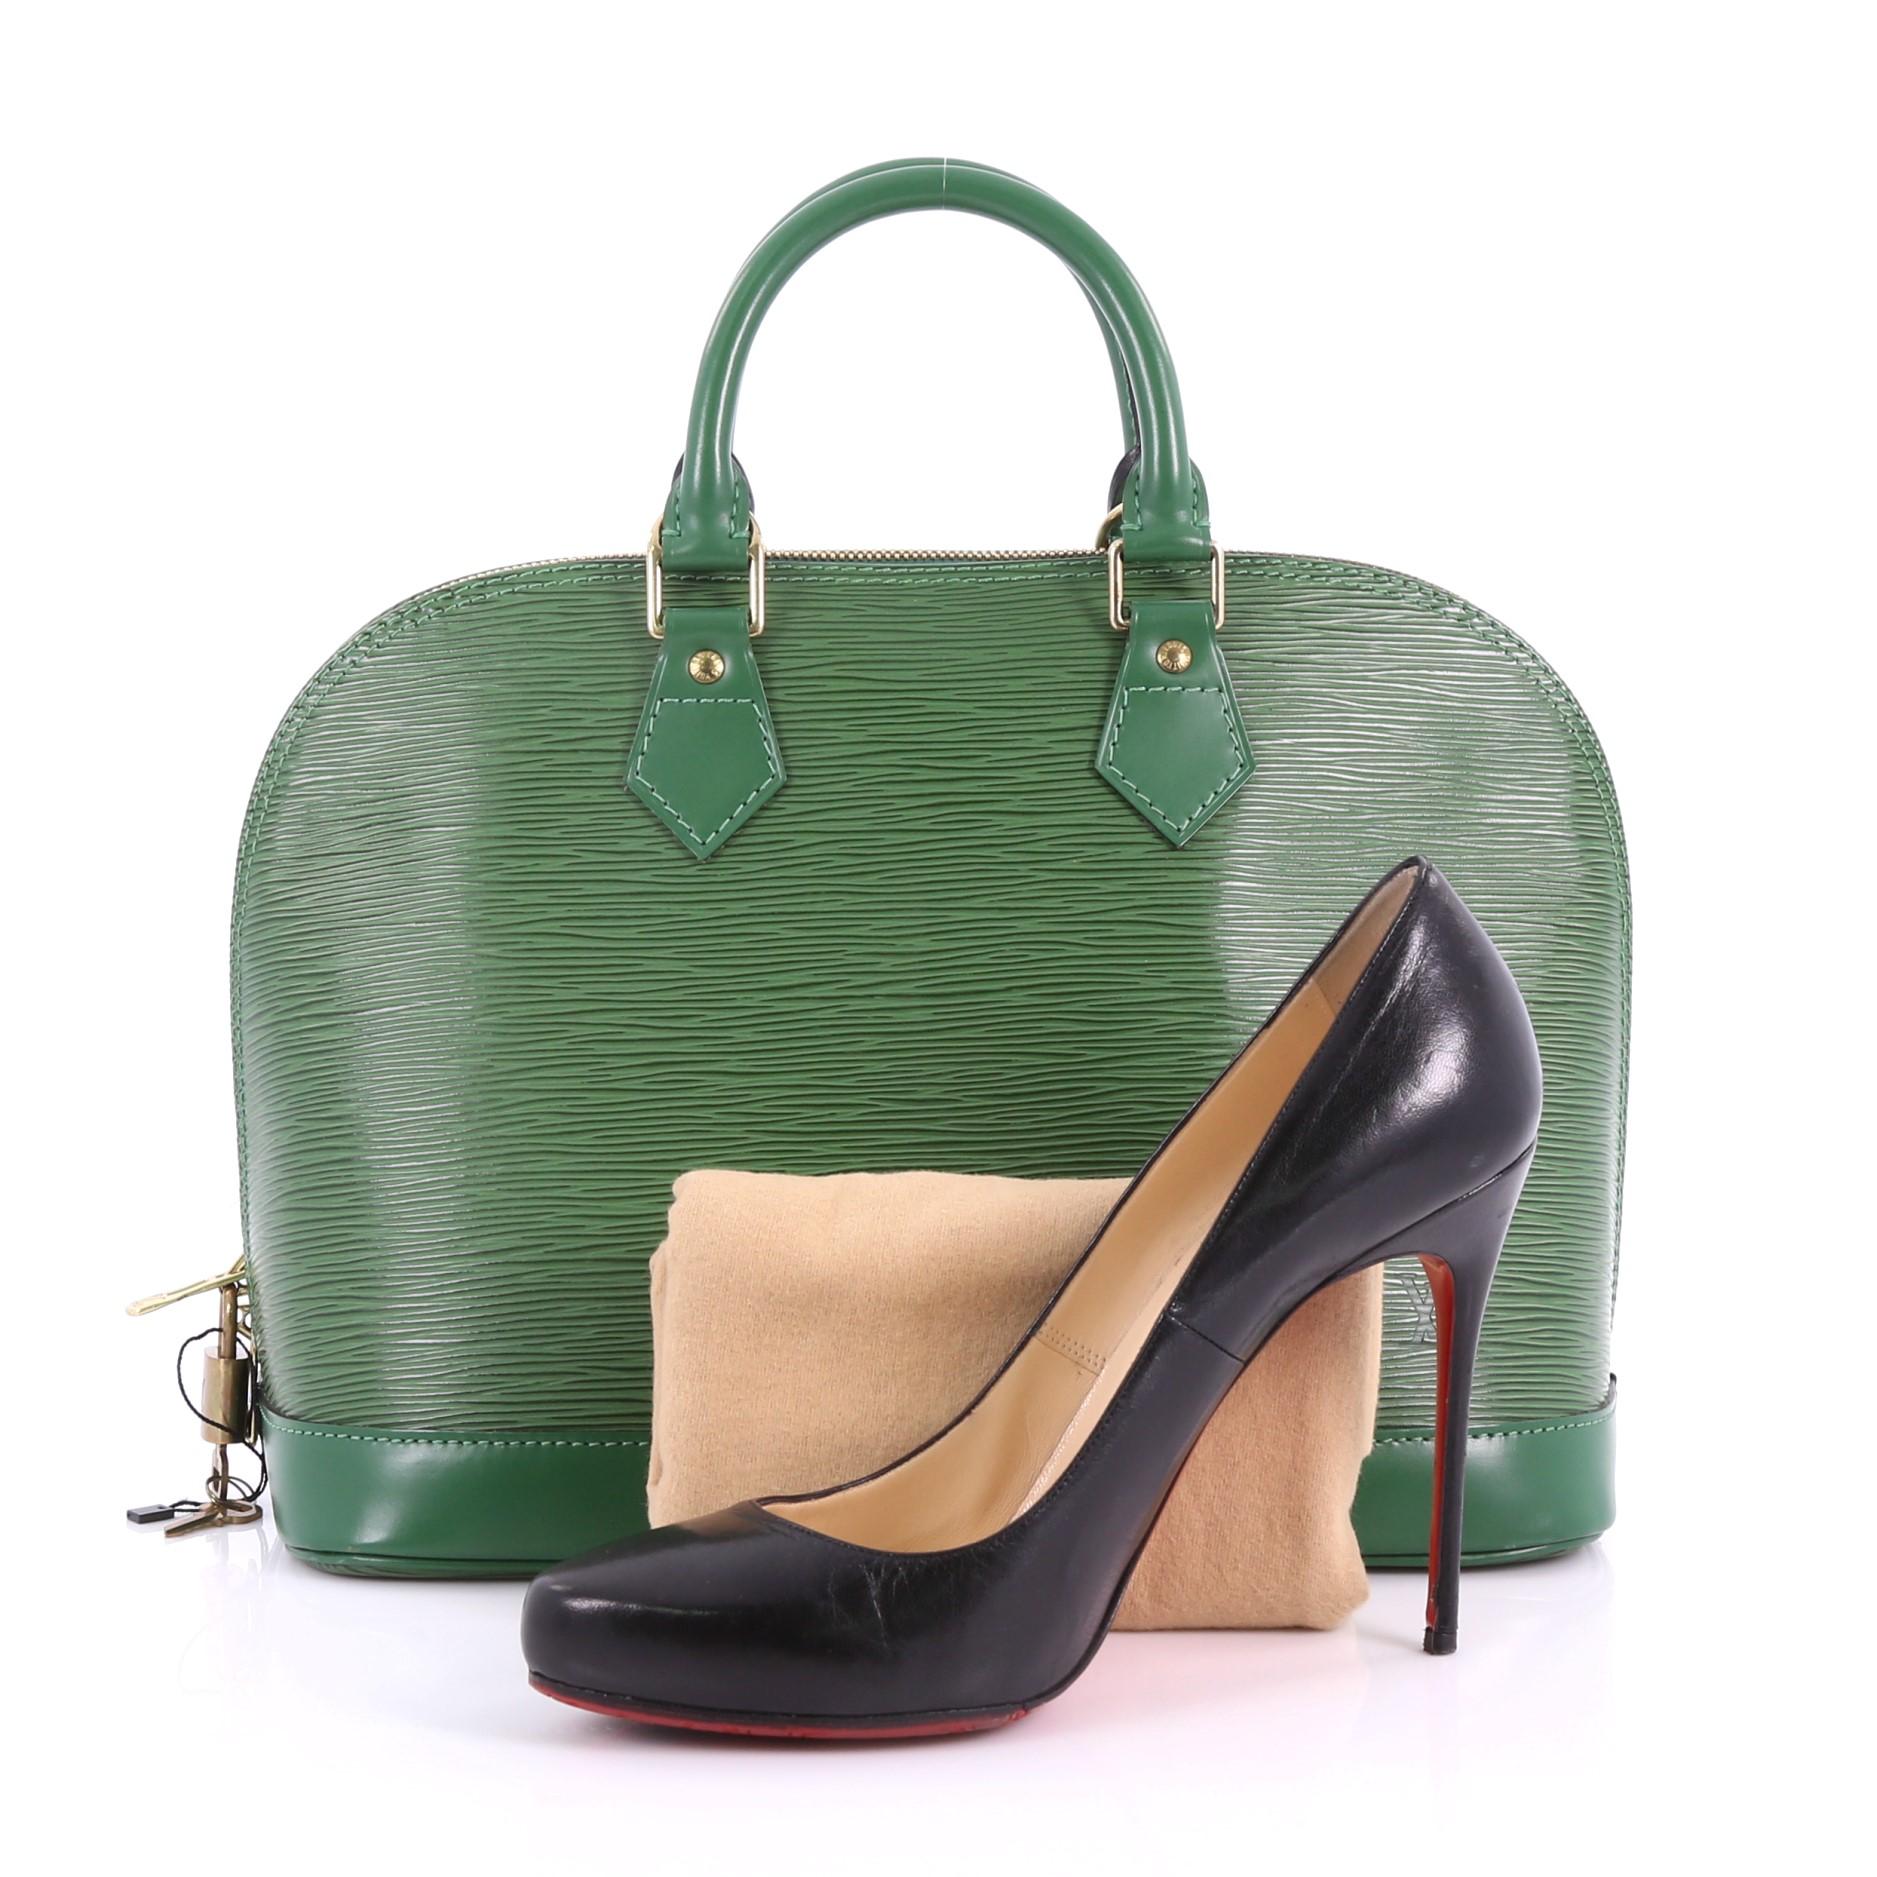 This Louis Vuitton Vintage Alma Handbag Epi Leather PM, crafted from green epi leather, features dual rolled handles, a sturdy reinforced base, and gold-tone hardware. Its all-around zip closure opens to a green microfiber with slip pocket.